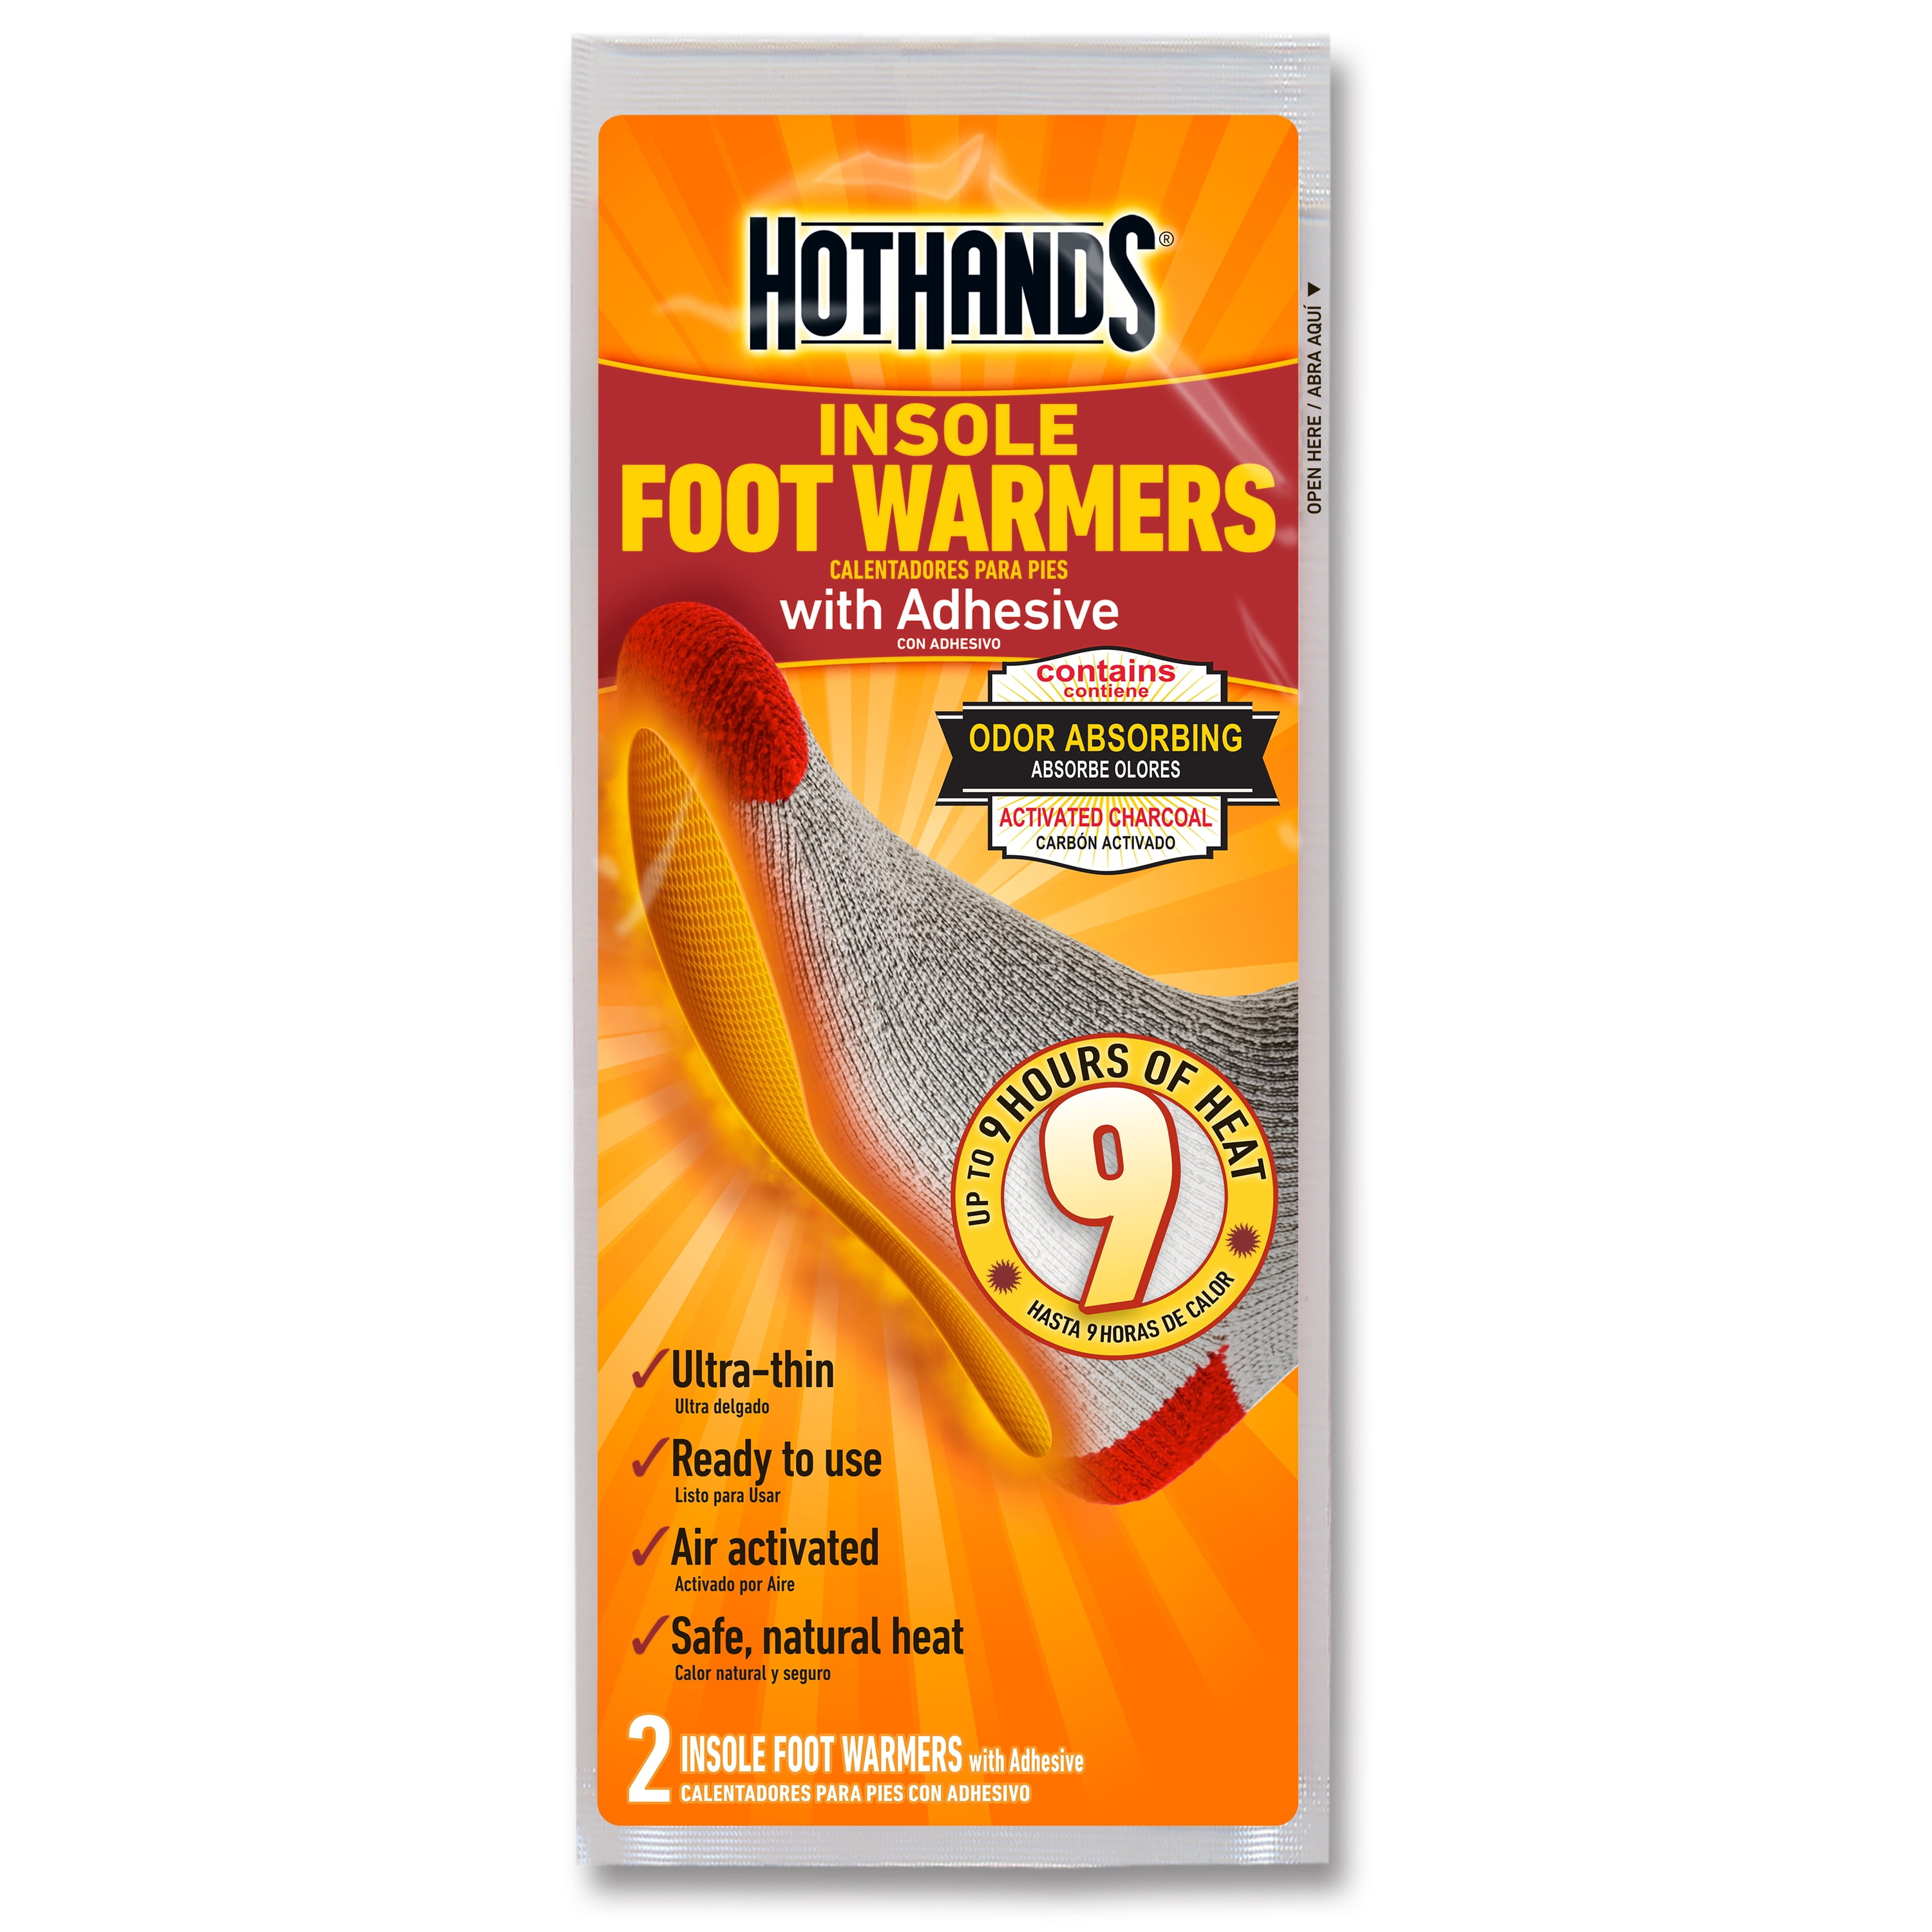 6 Plus Hour Odorless Details about   Adhesive Toe Warmers 8 Pair Non-toxic & Air-activated 